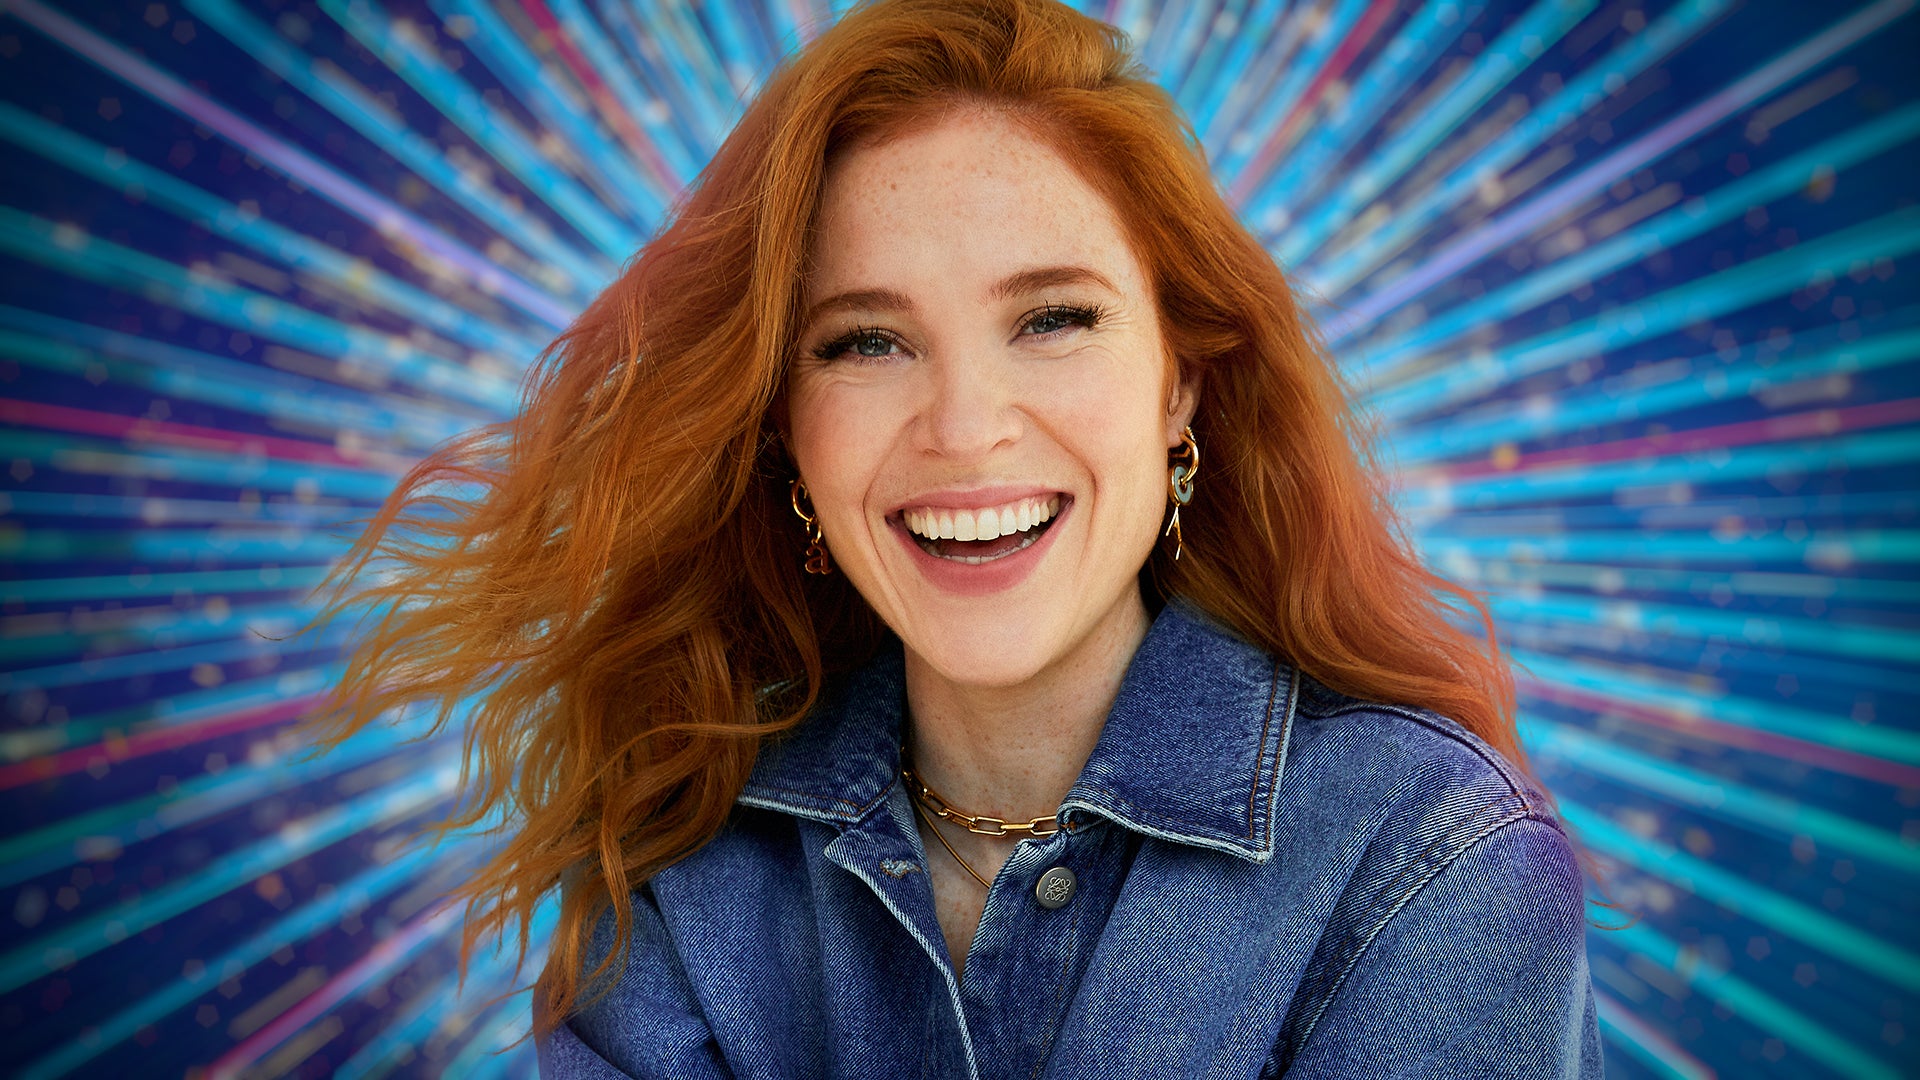 Angela Scanlon absolutely furious at BBC producers remark about TV role The Independent